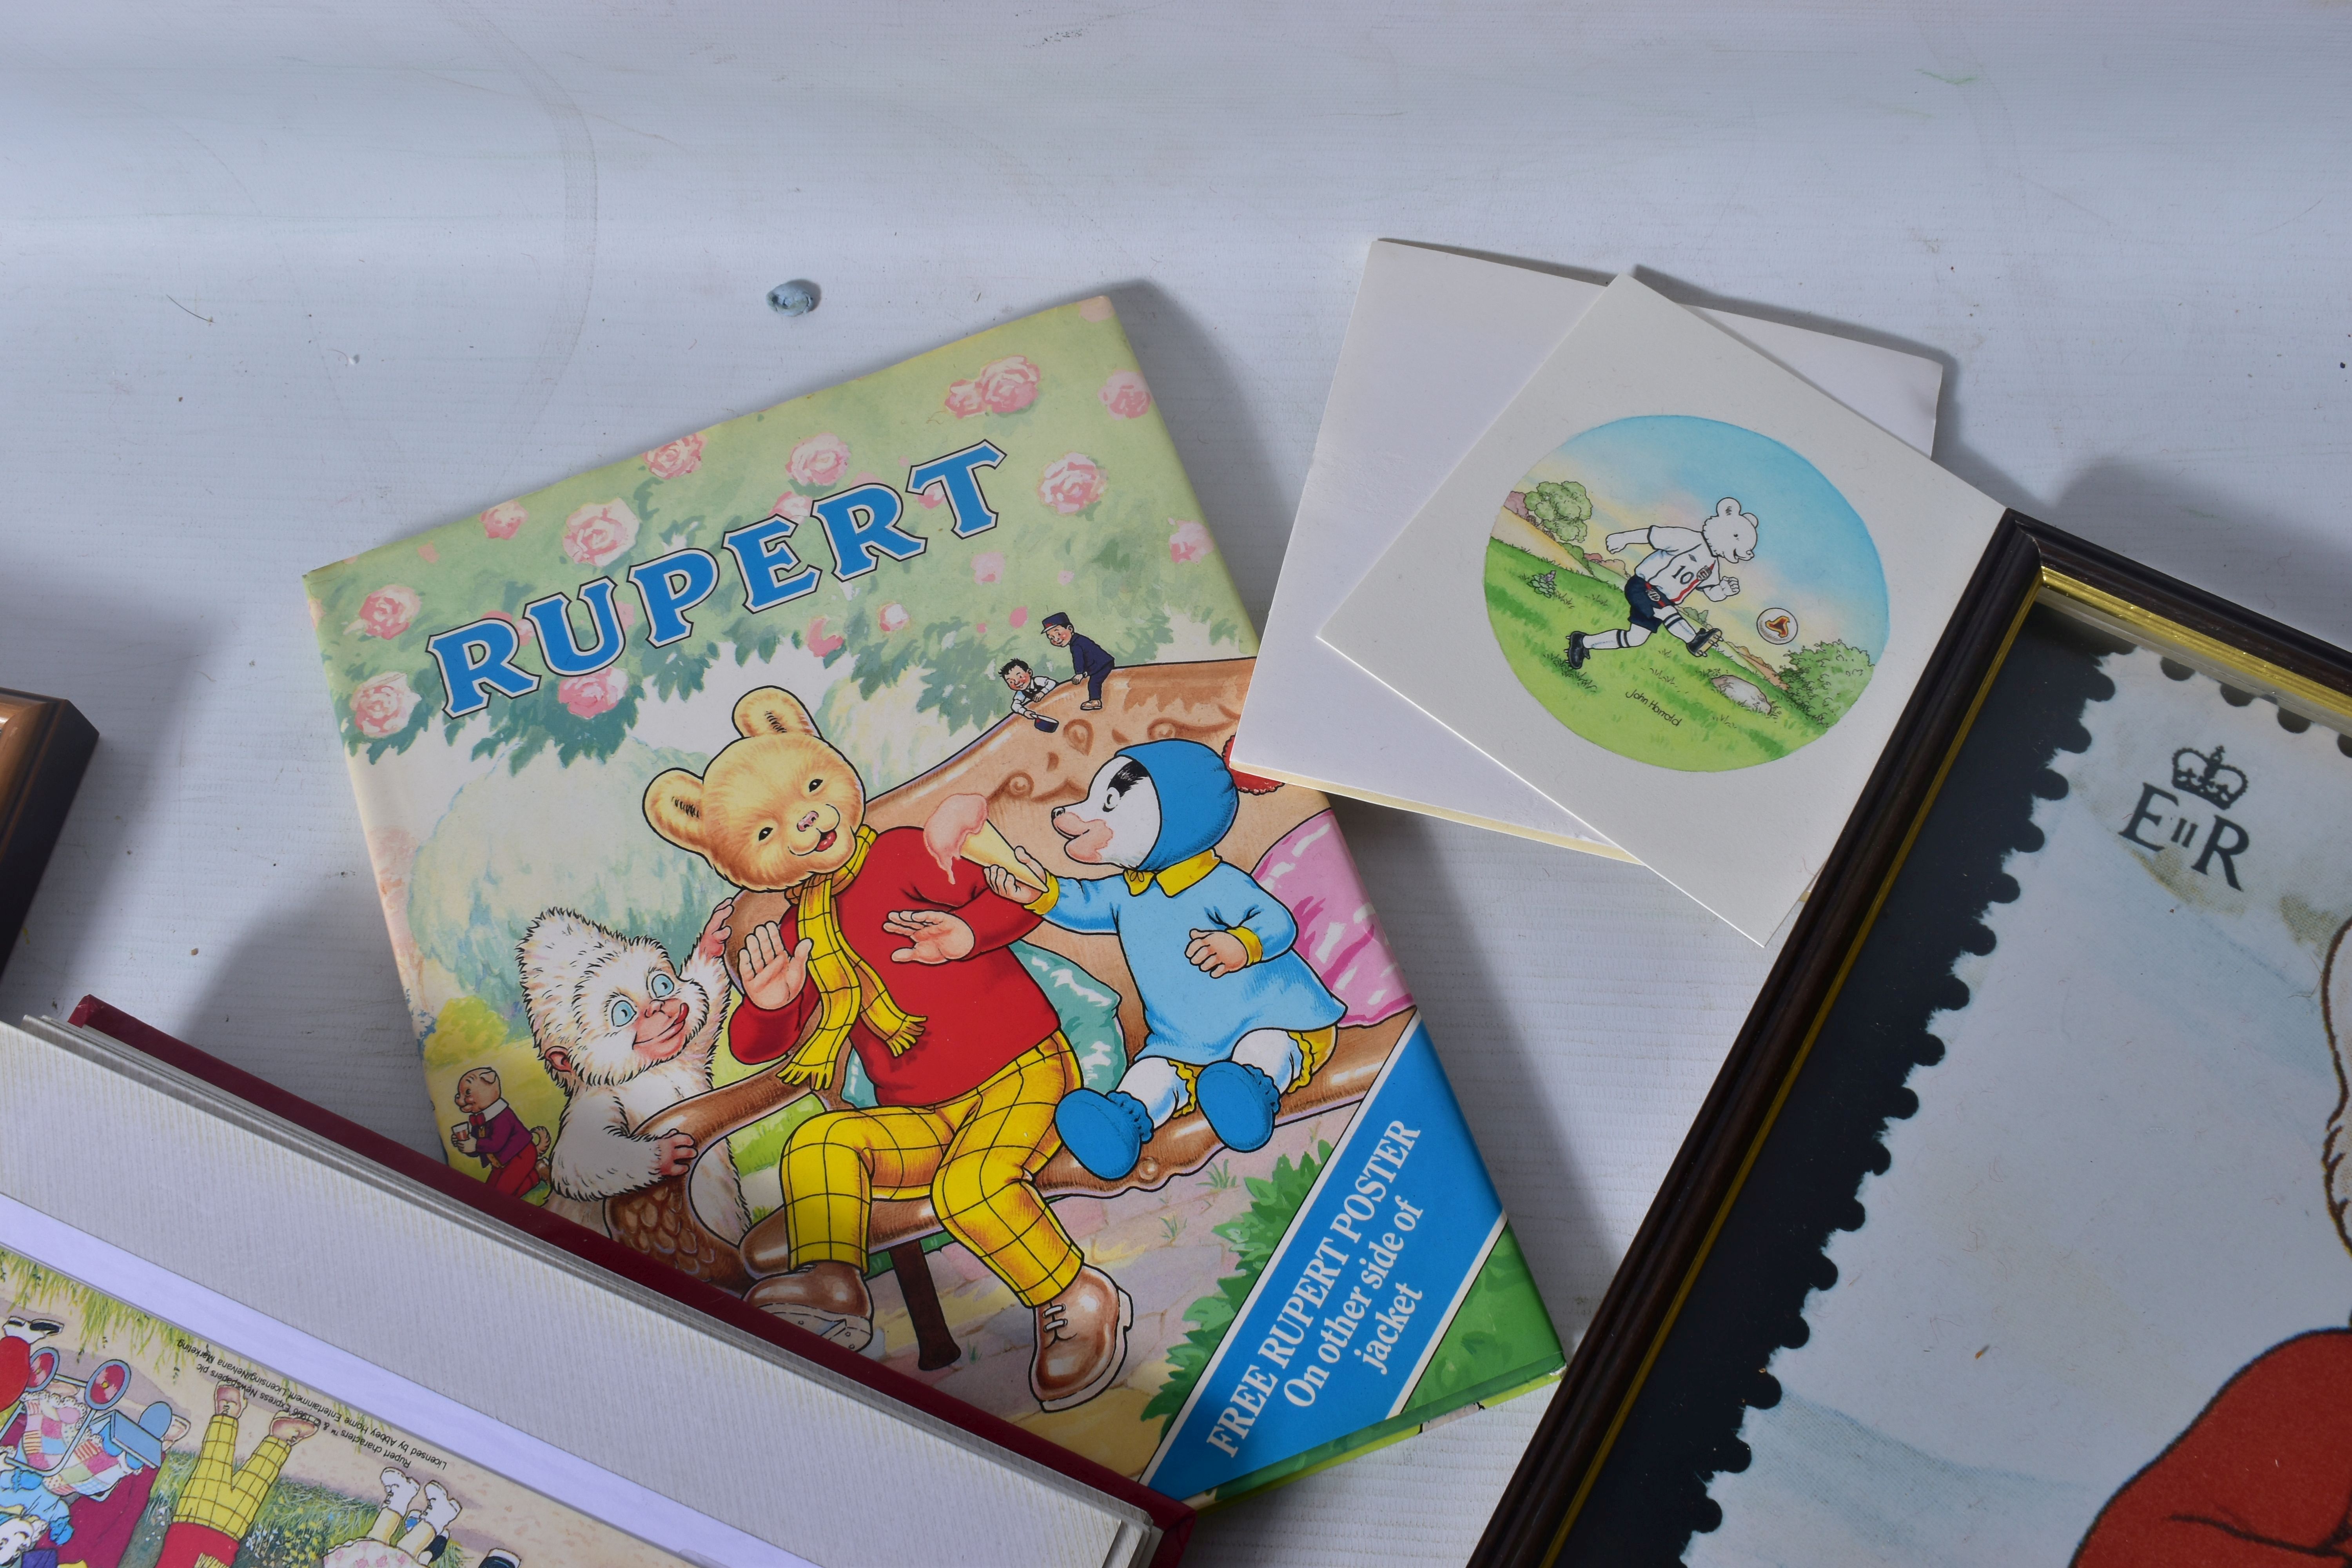 AFTER ALFRED BESTALL THREE SIGNED RUPERT THE BEAR PRINTS, three limited edition signed prints, - Image 12 of 26